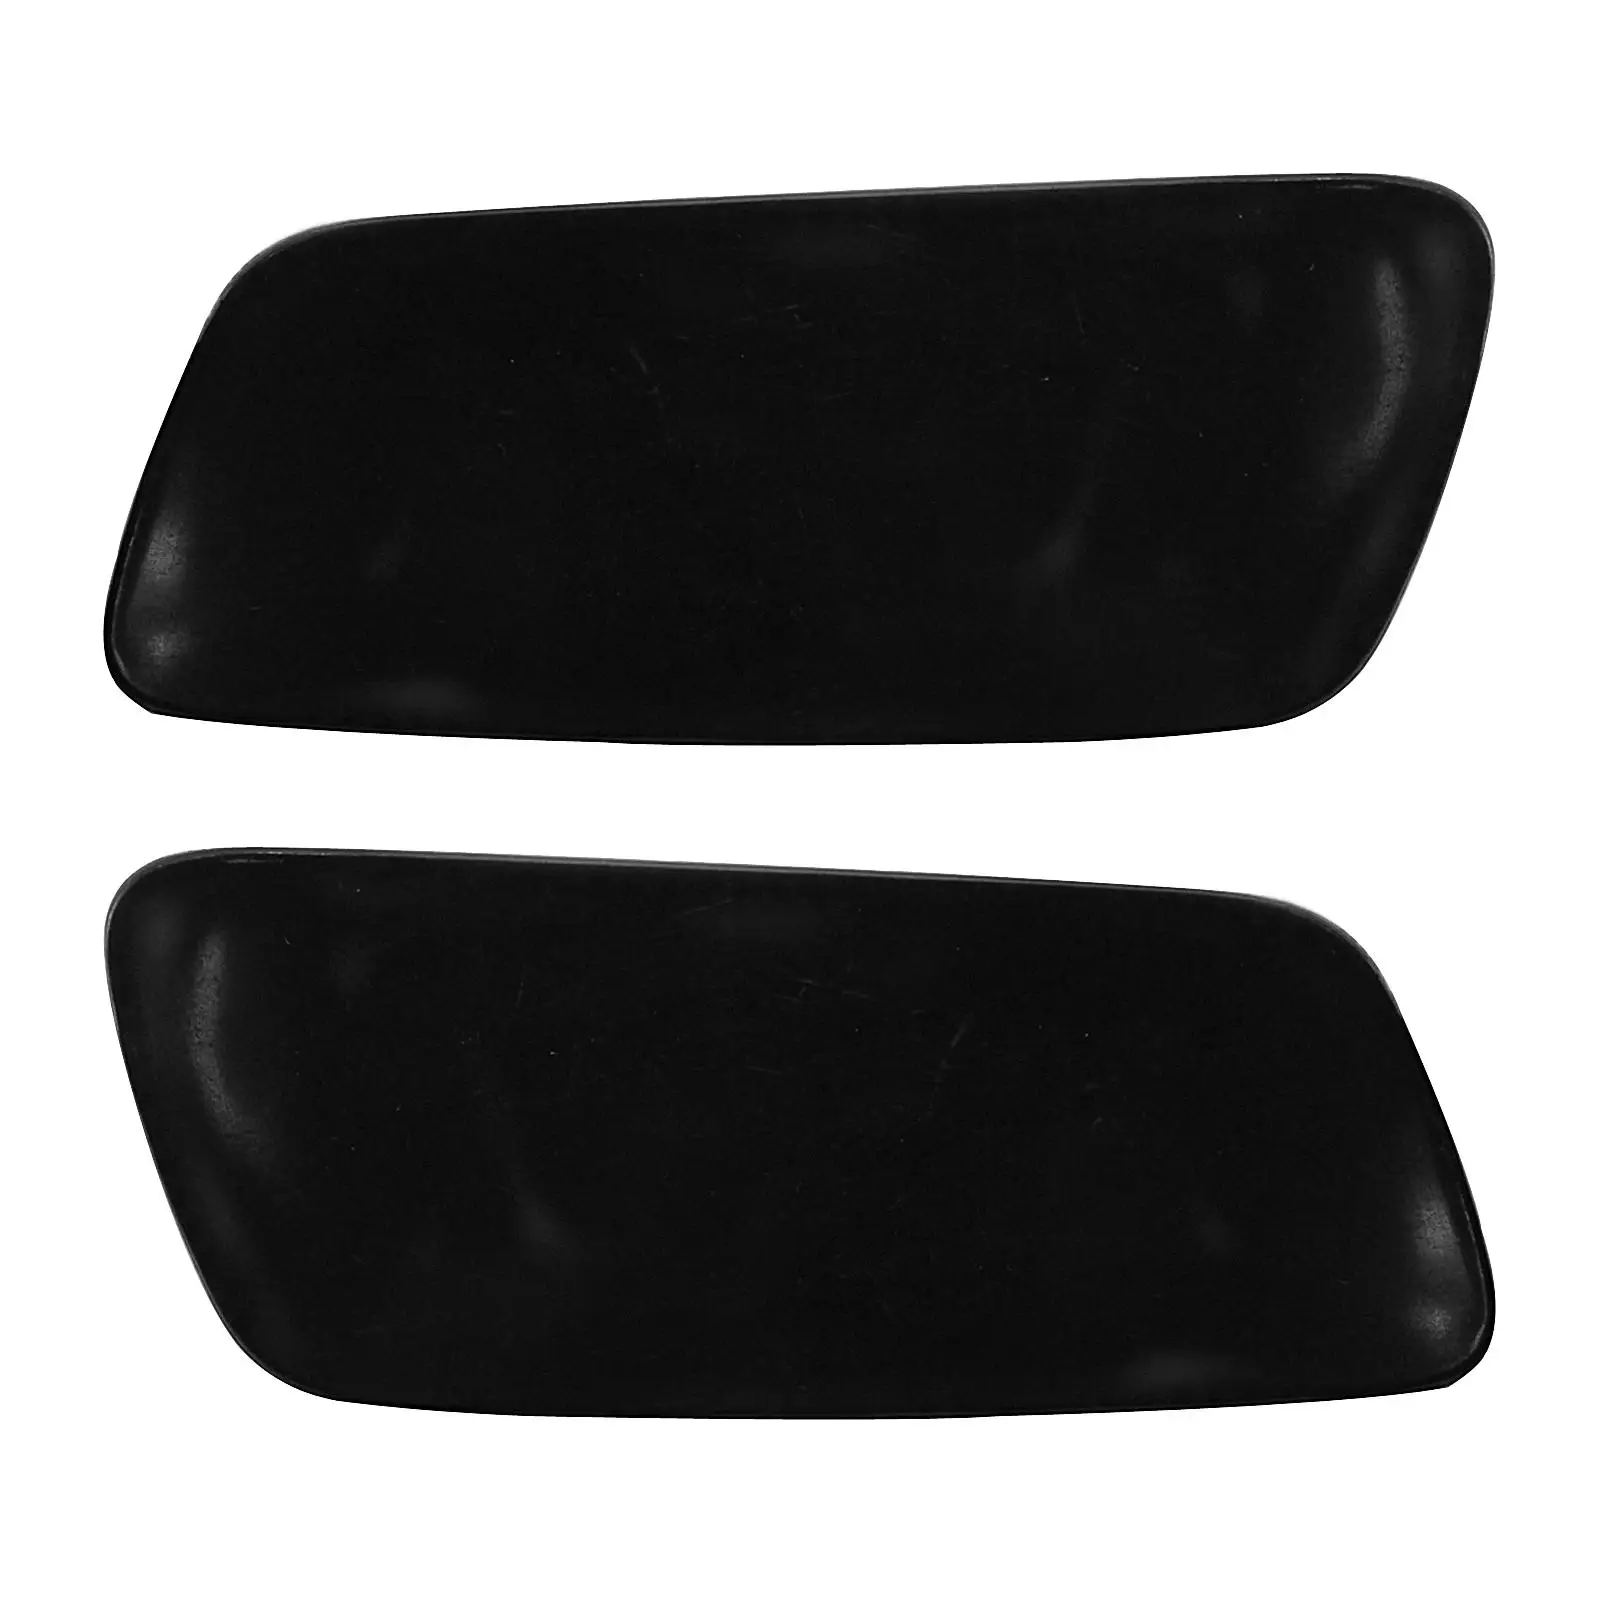 1 Pair Front Headlight Washer Jet Cover VO1049108 191275531297 398398420 Car Parts 39839842 39839830 Fits for Volvo V90